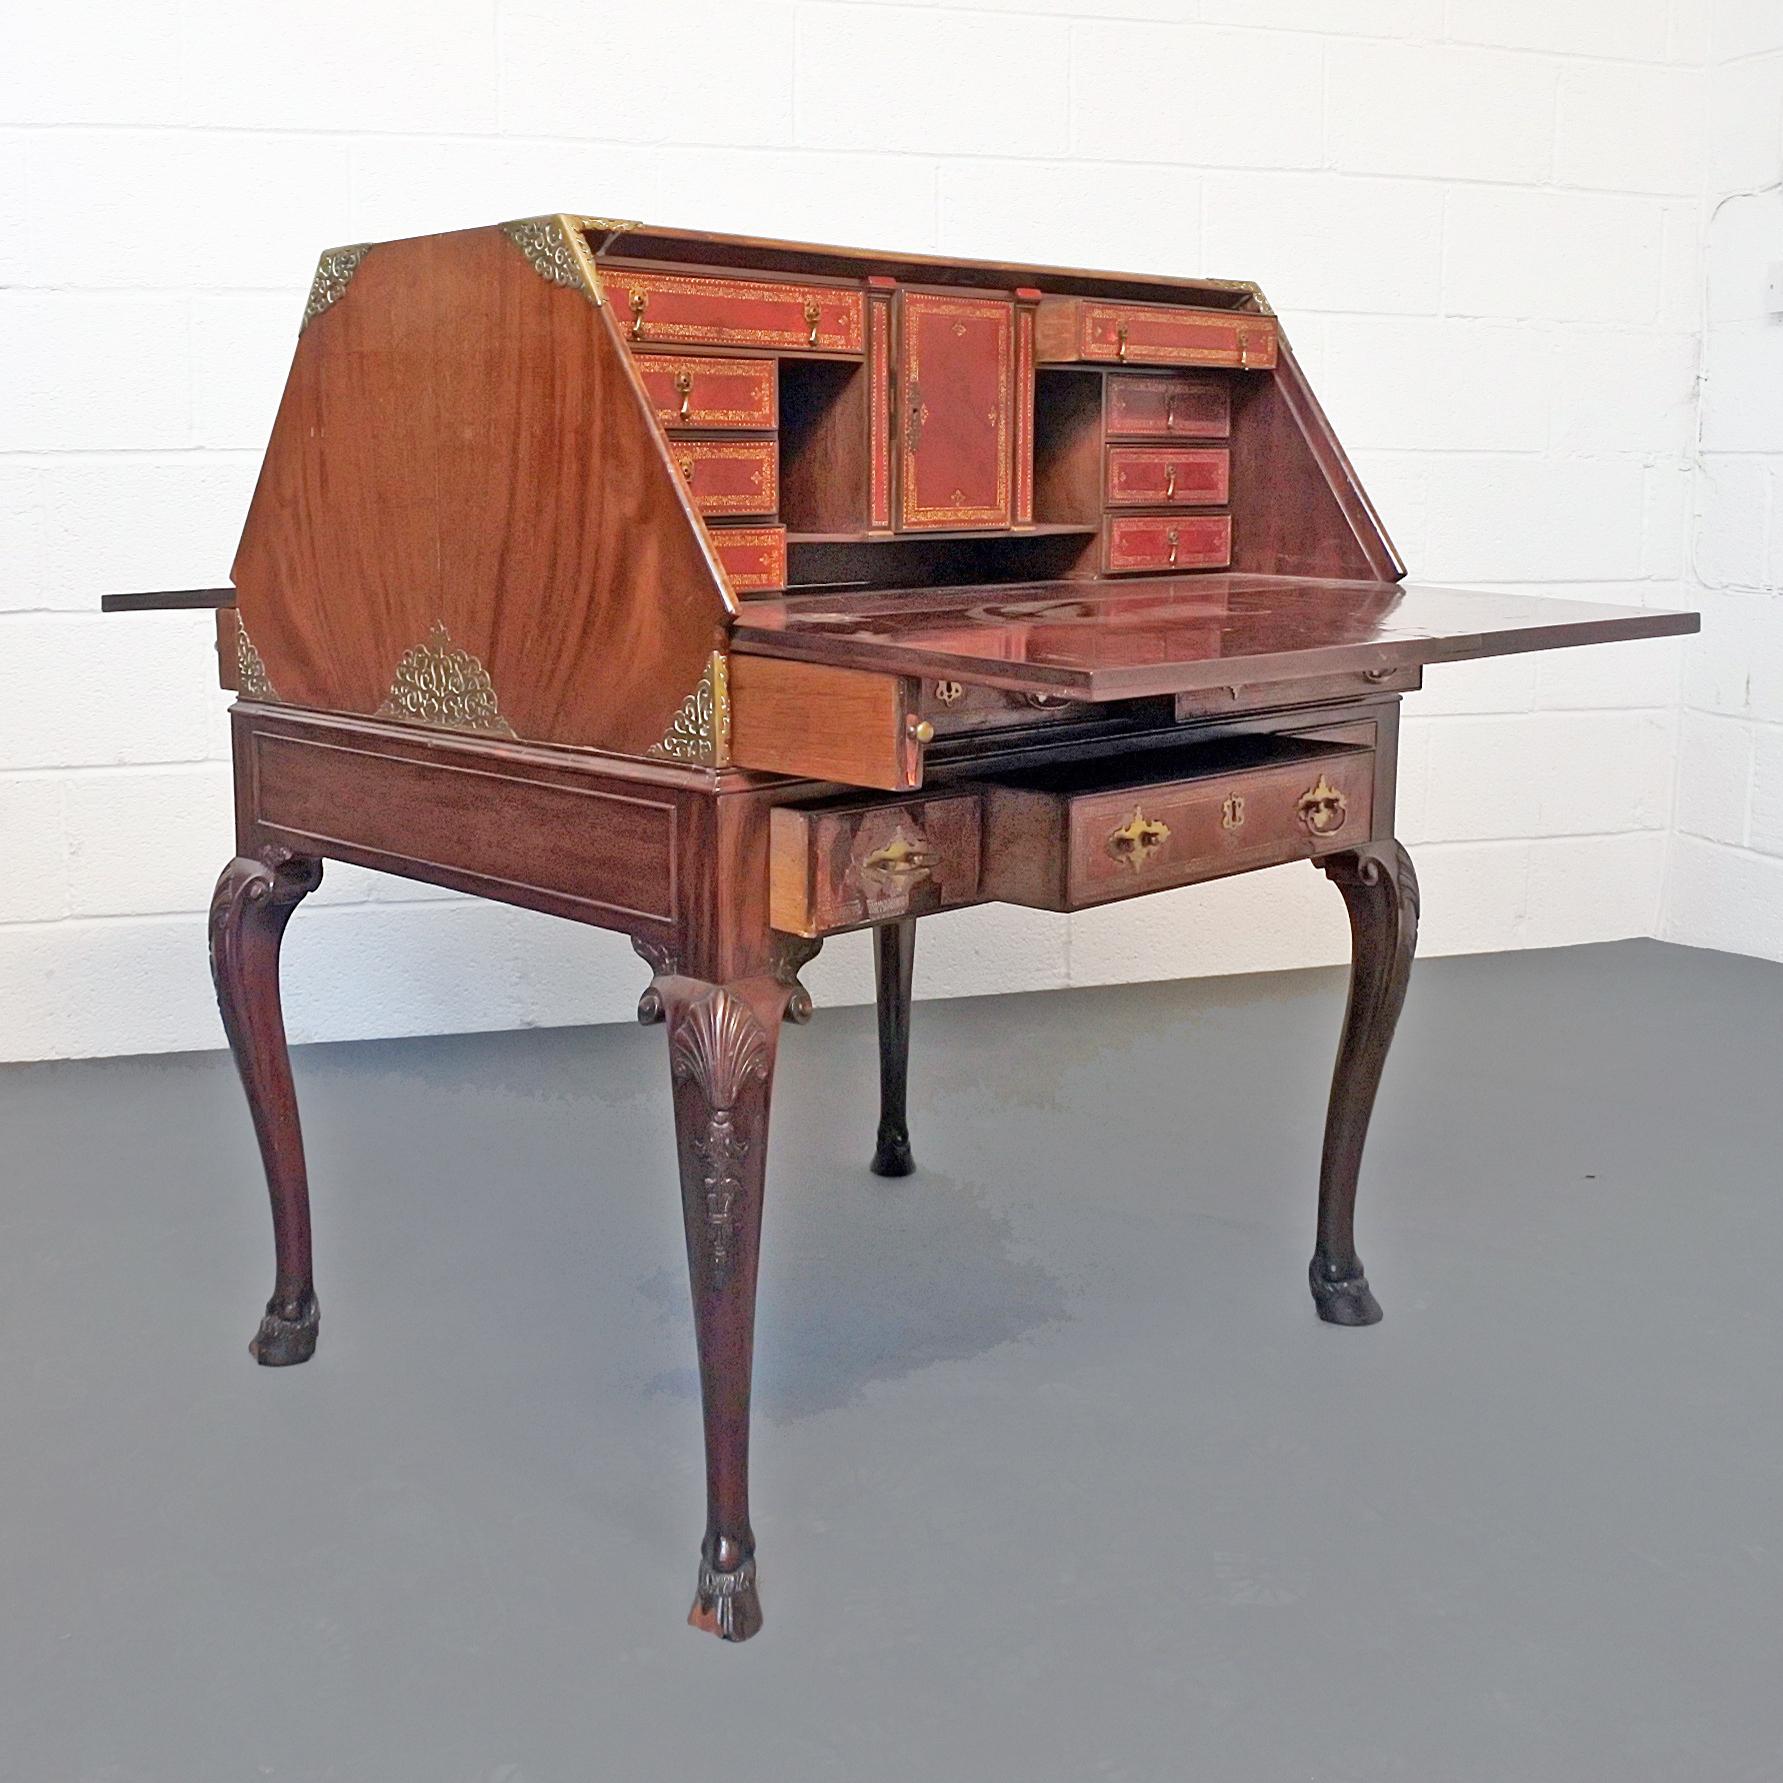 A 19th century double-sided bureau with leather fronted drop panels revealing intricately embossed leather fronted drawers and delicate brass fittings set on cabriole legs and hoof feet.